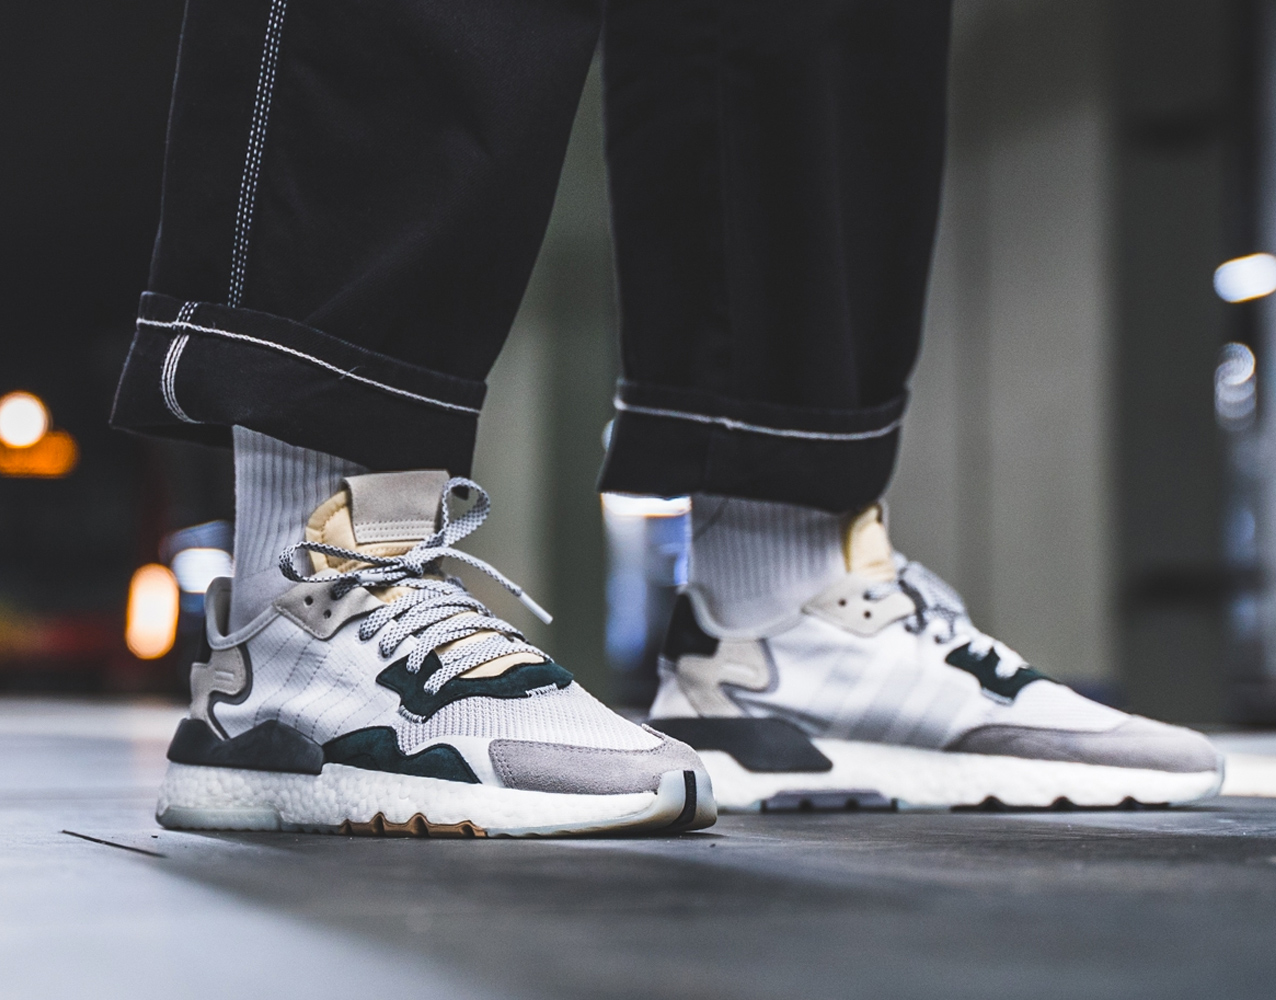 The adidas Nite Jogger returns in two 